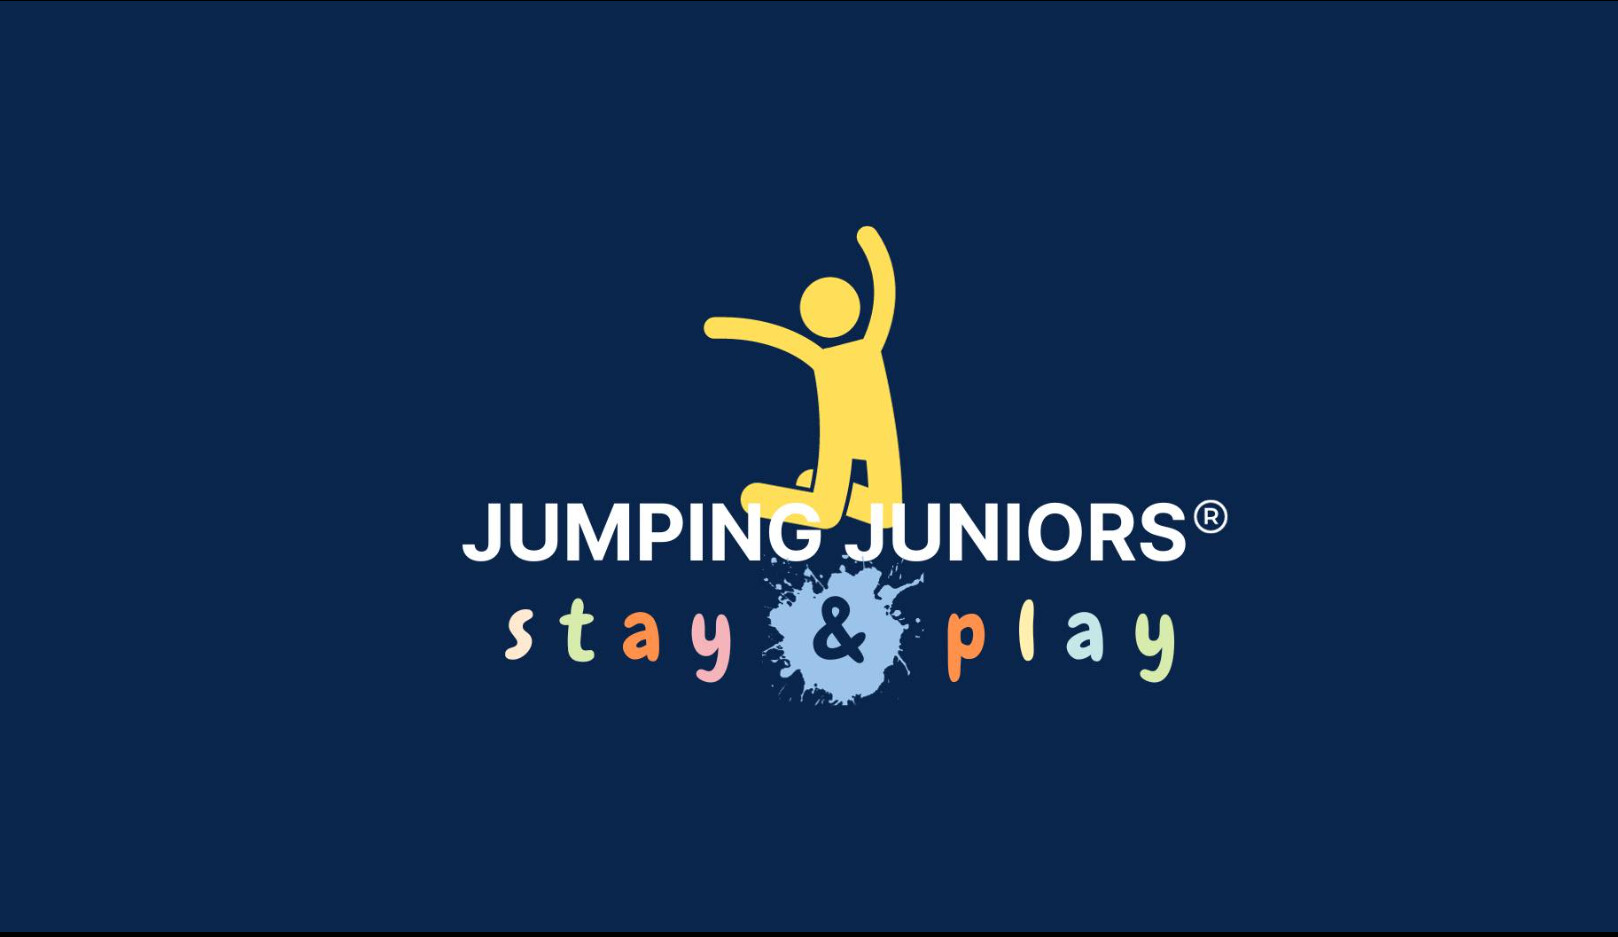 Jumping Juniors Stay and Play